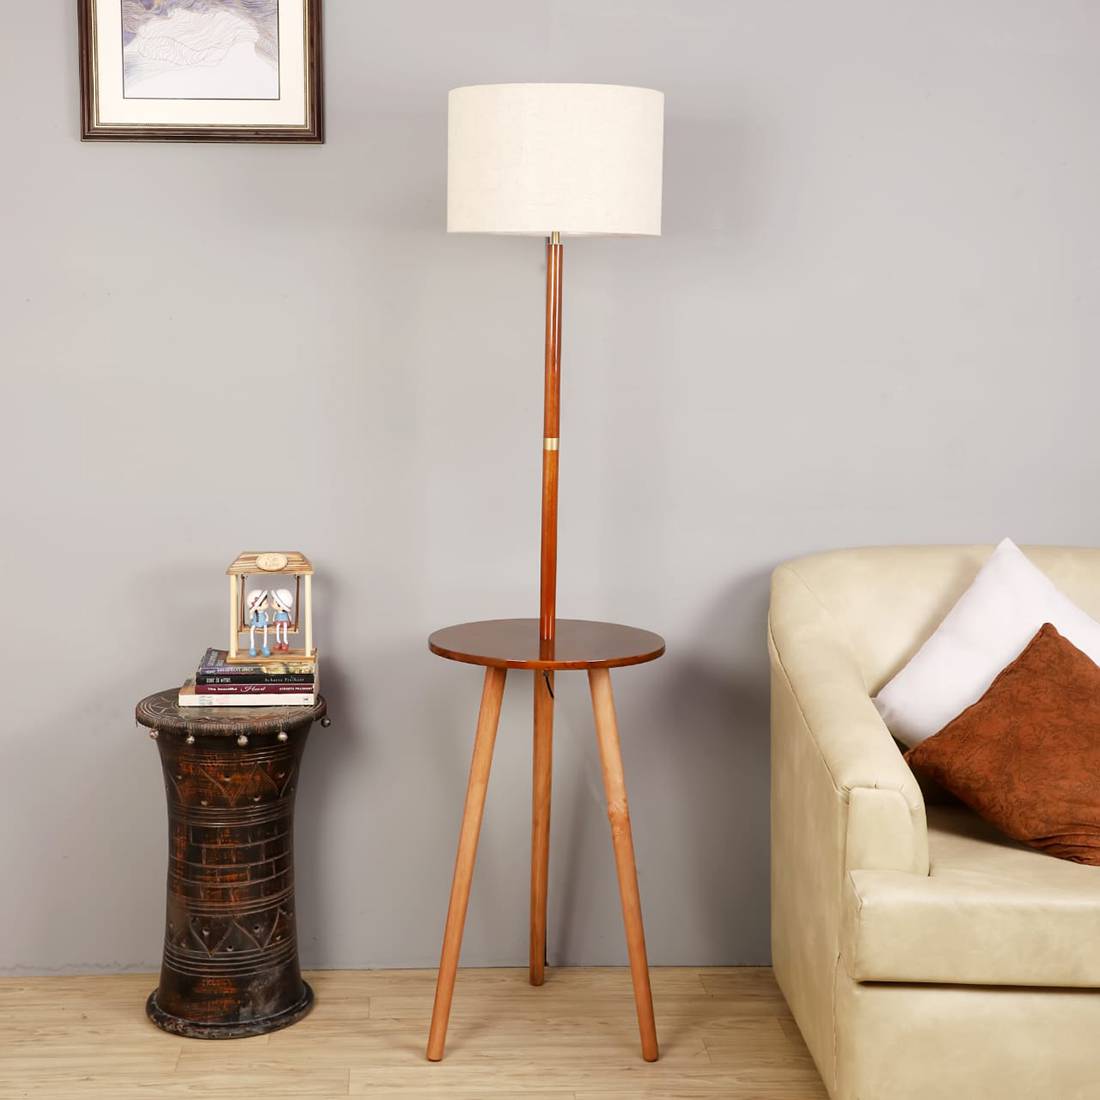 Floor Lamps @75% Off: Buy Floor Lamps Online at the Lowest Prices. - Urban  Ladder